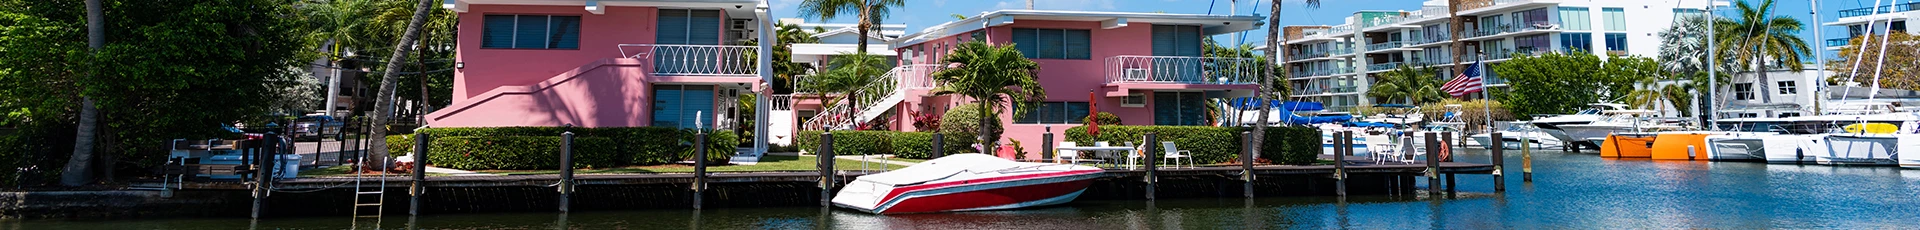 Boat Removal, Dismantle and Disposal in Naples Park Florida